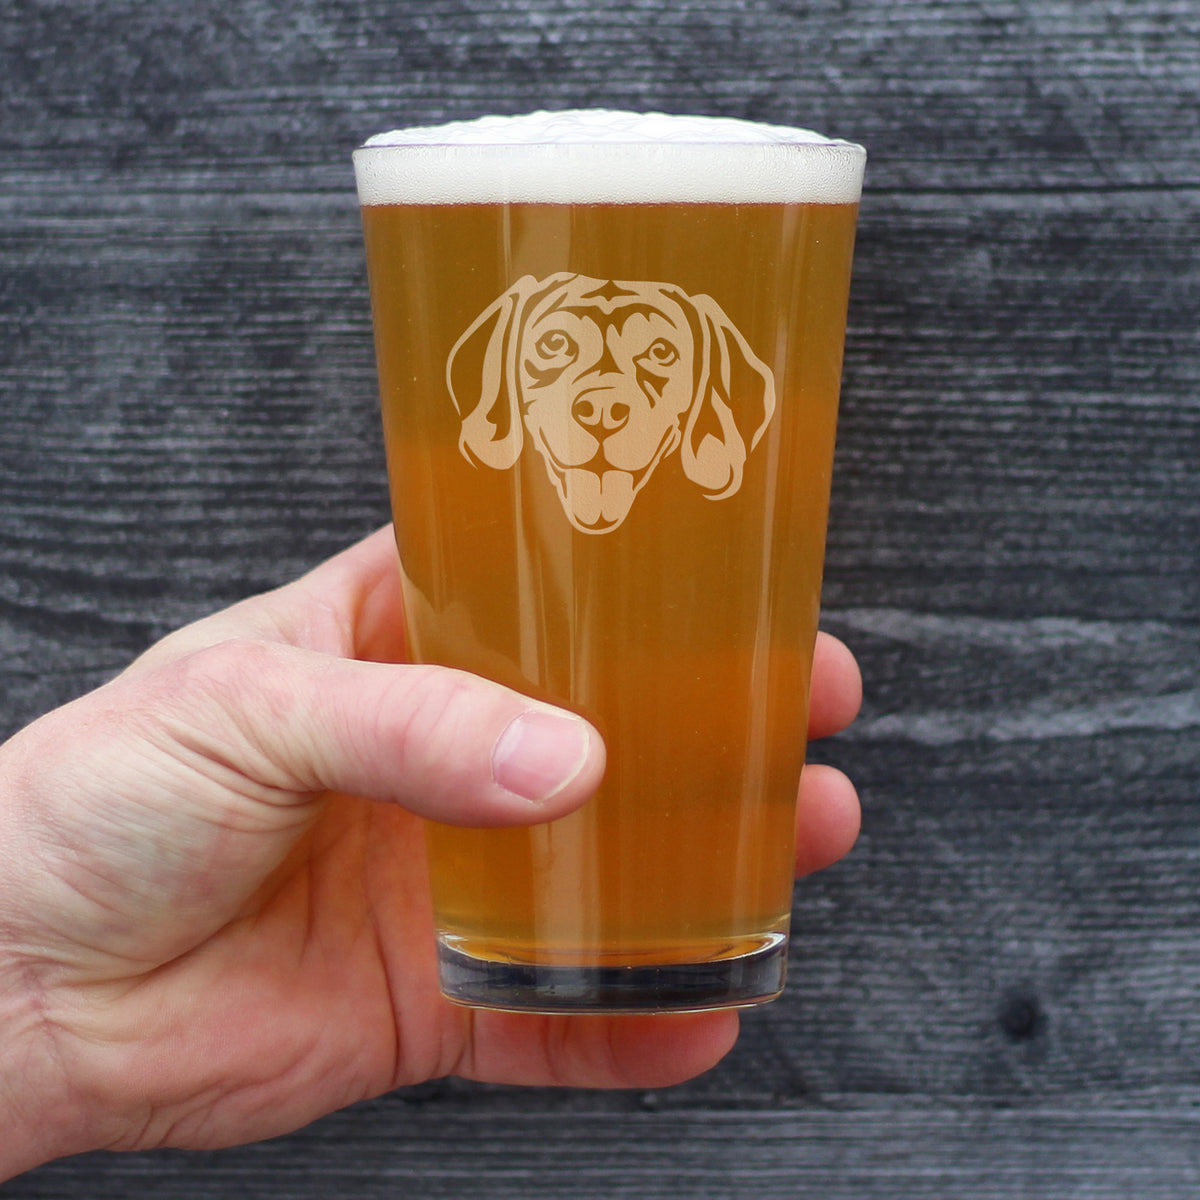 Happy Beagle Face Pint Glass for Beer - Fun Dog Themed Decor and Gifts for Moms &amp; Dads of Beagles - 16 oz Glasses